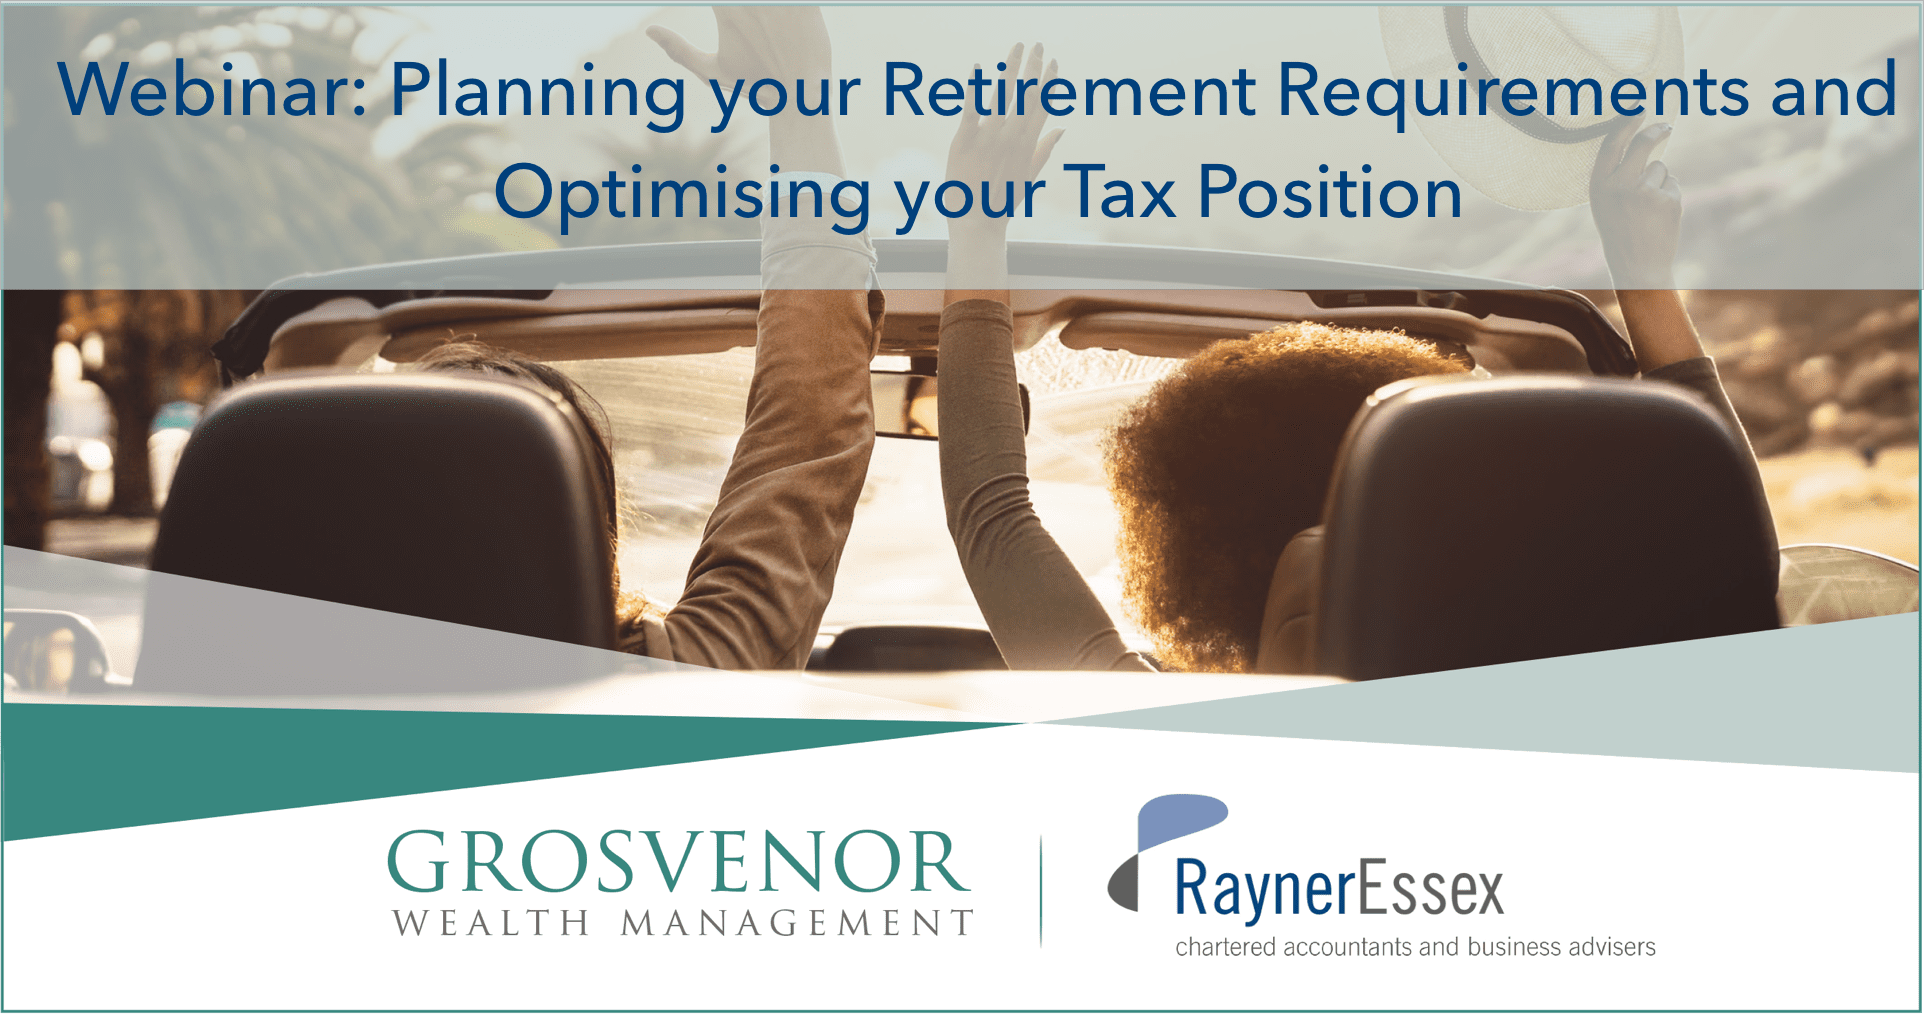 Planning your Retirement Requirements and Optimising your Tax Position